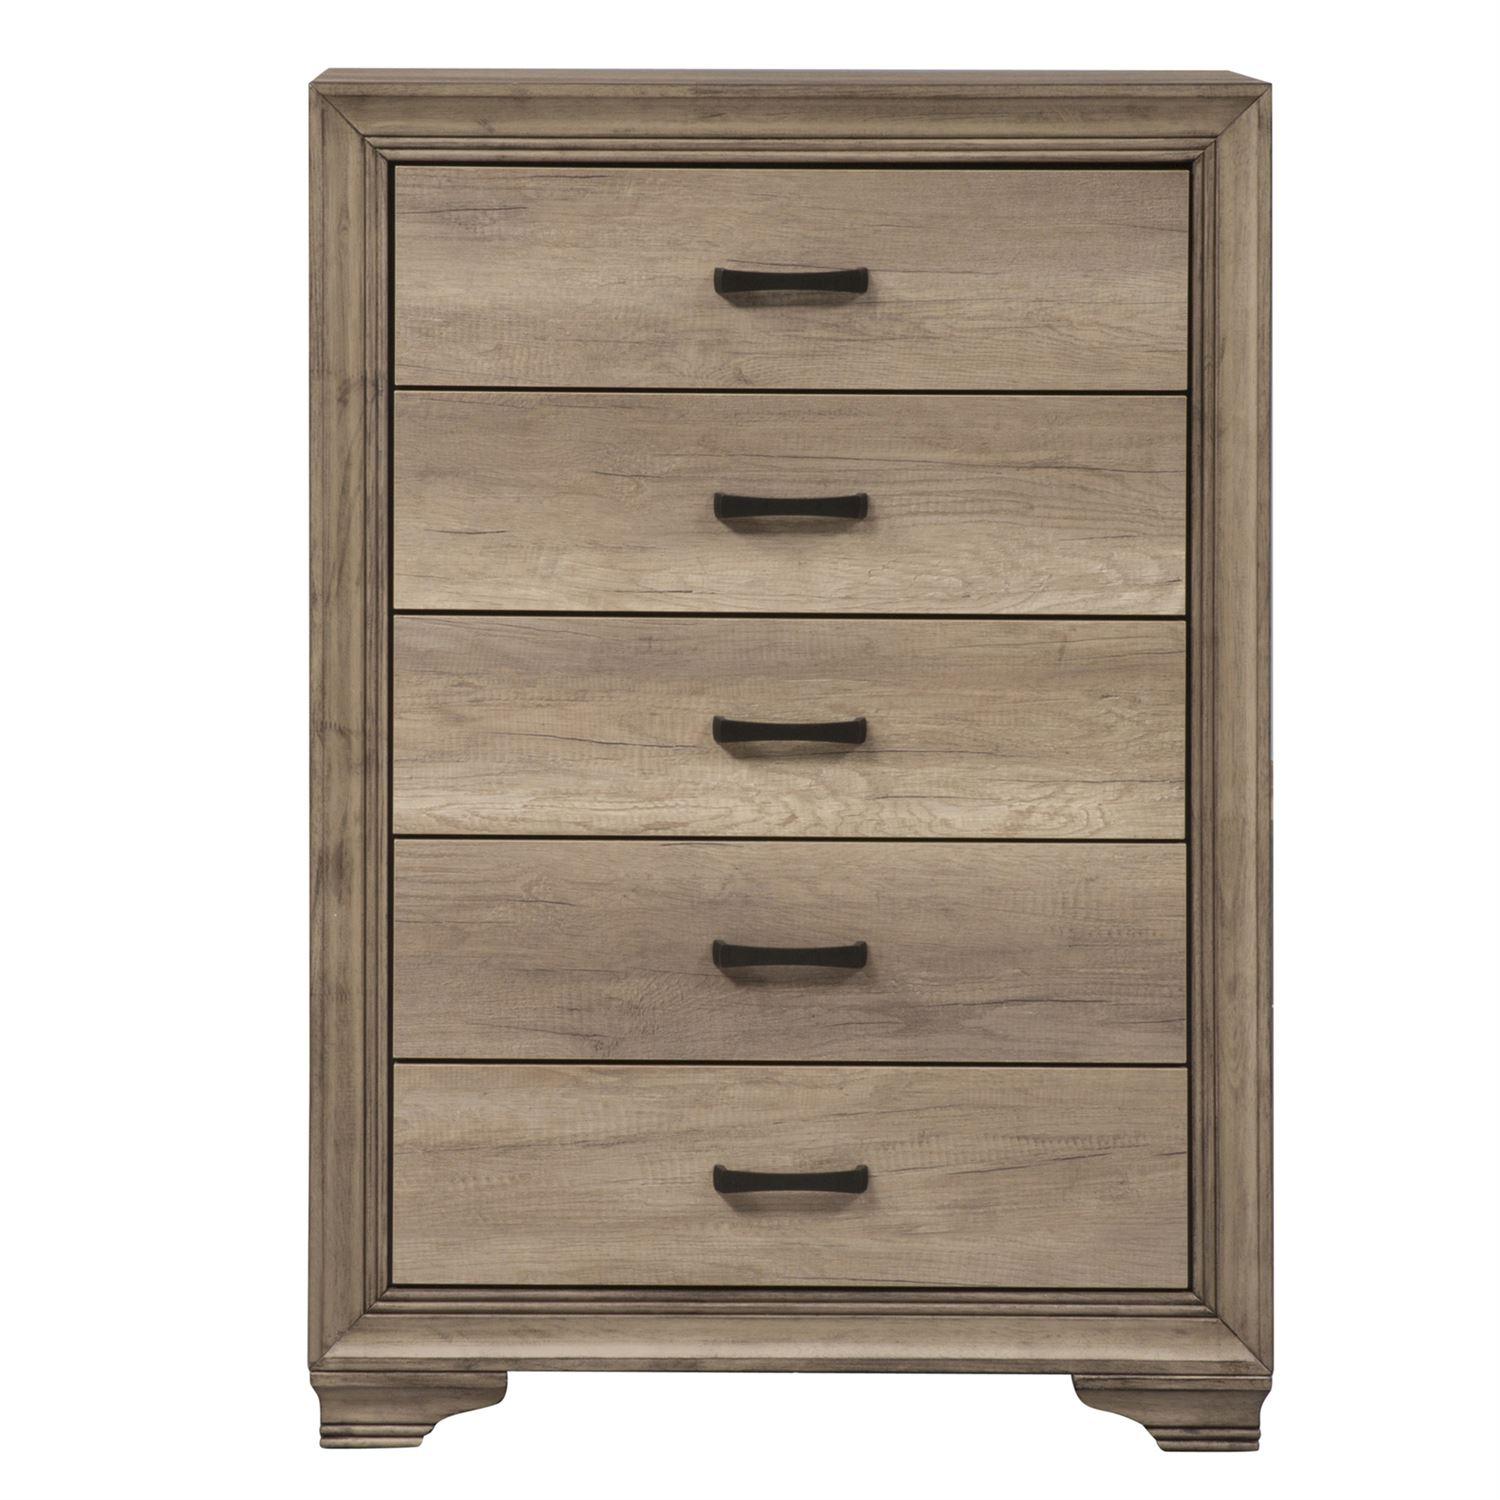 Transitional Bachelor Chest Sun Valley  (439-BR) Bachelor Chest 439-BR41 in Beige 